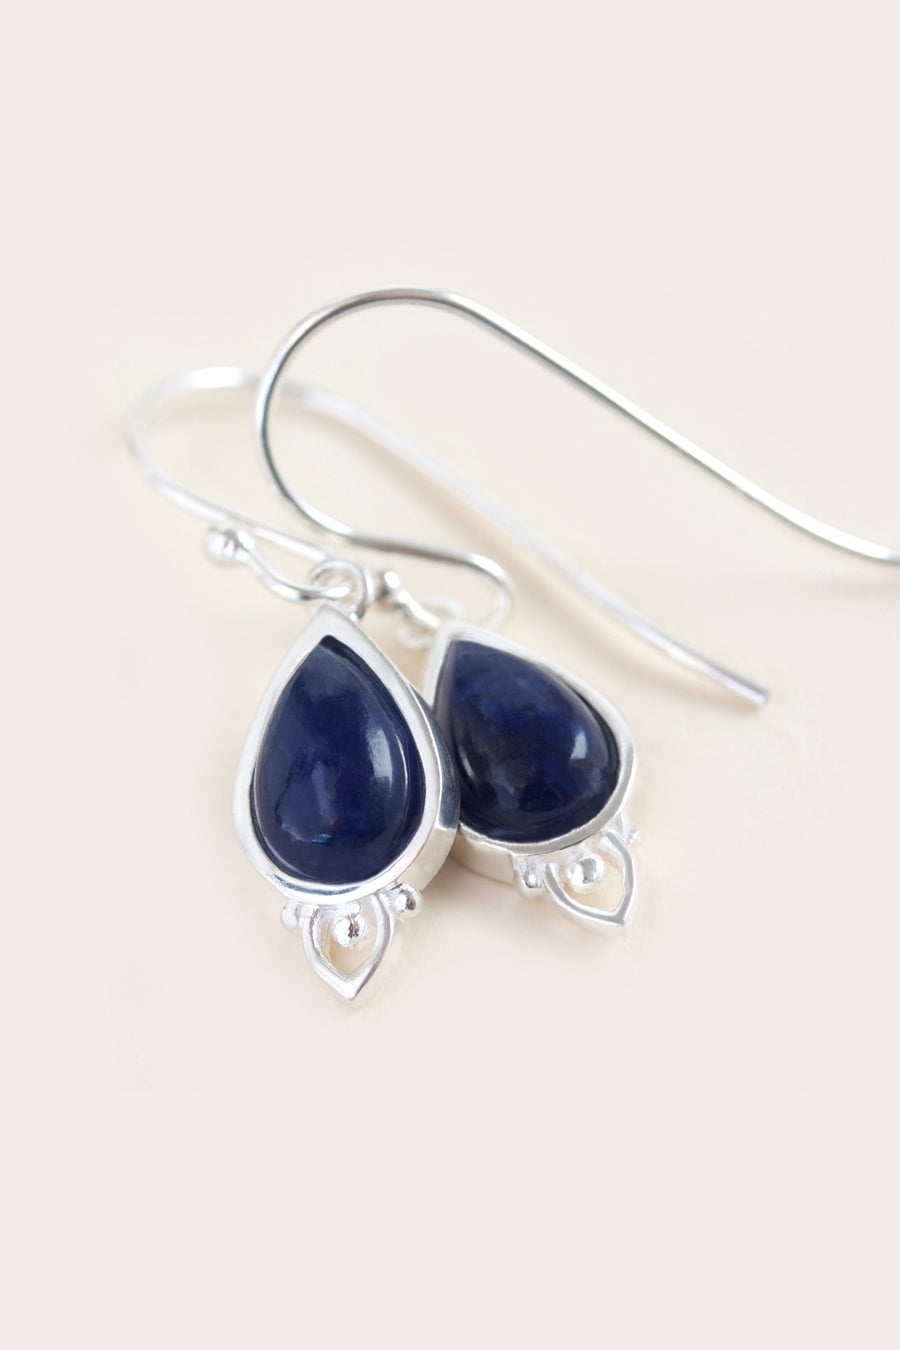 Third Eye Intuitive Intuition Earrings for Clarity NZ Jewellery